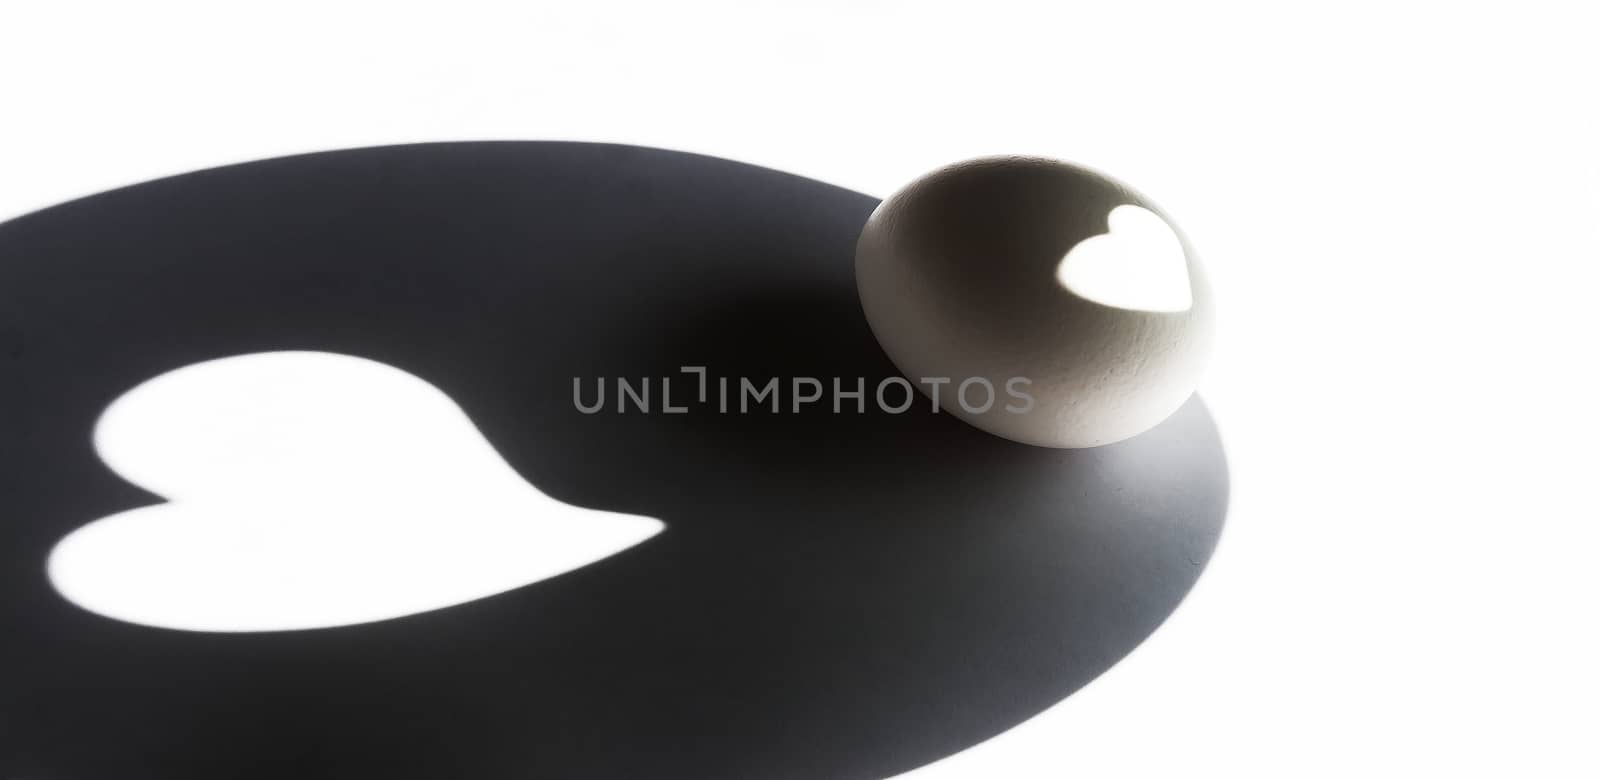 shadow of the eggs and the projection on his heart, abstract, black and white.